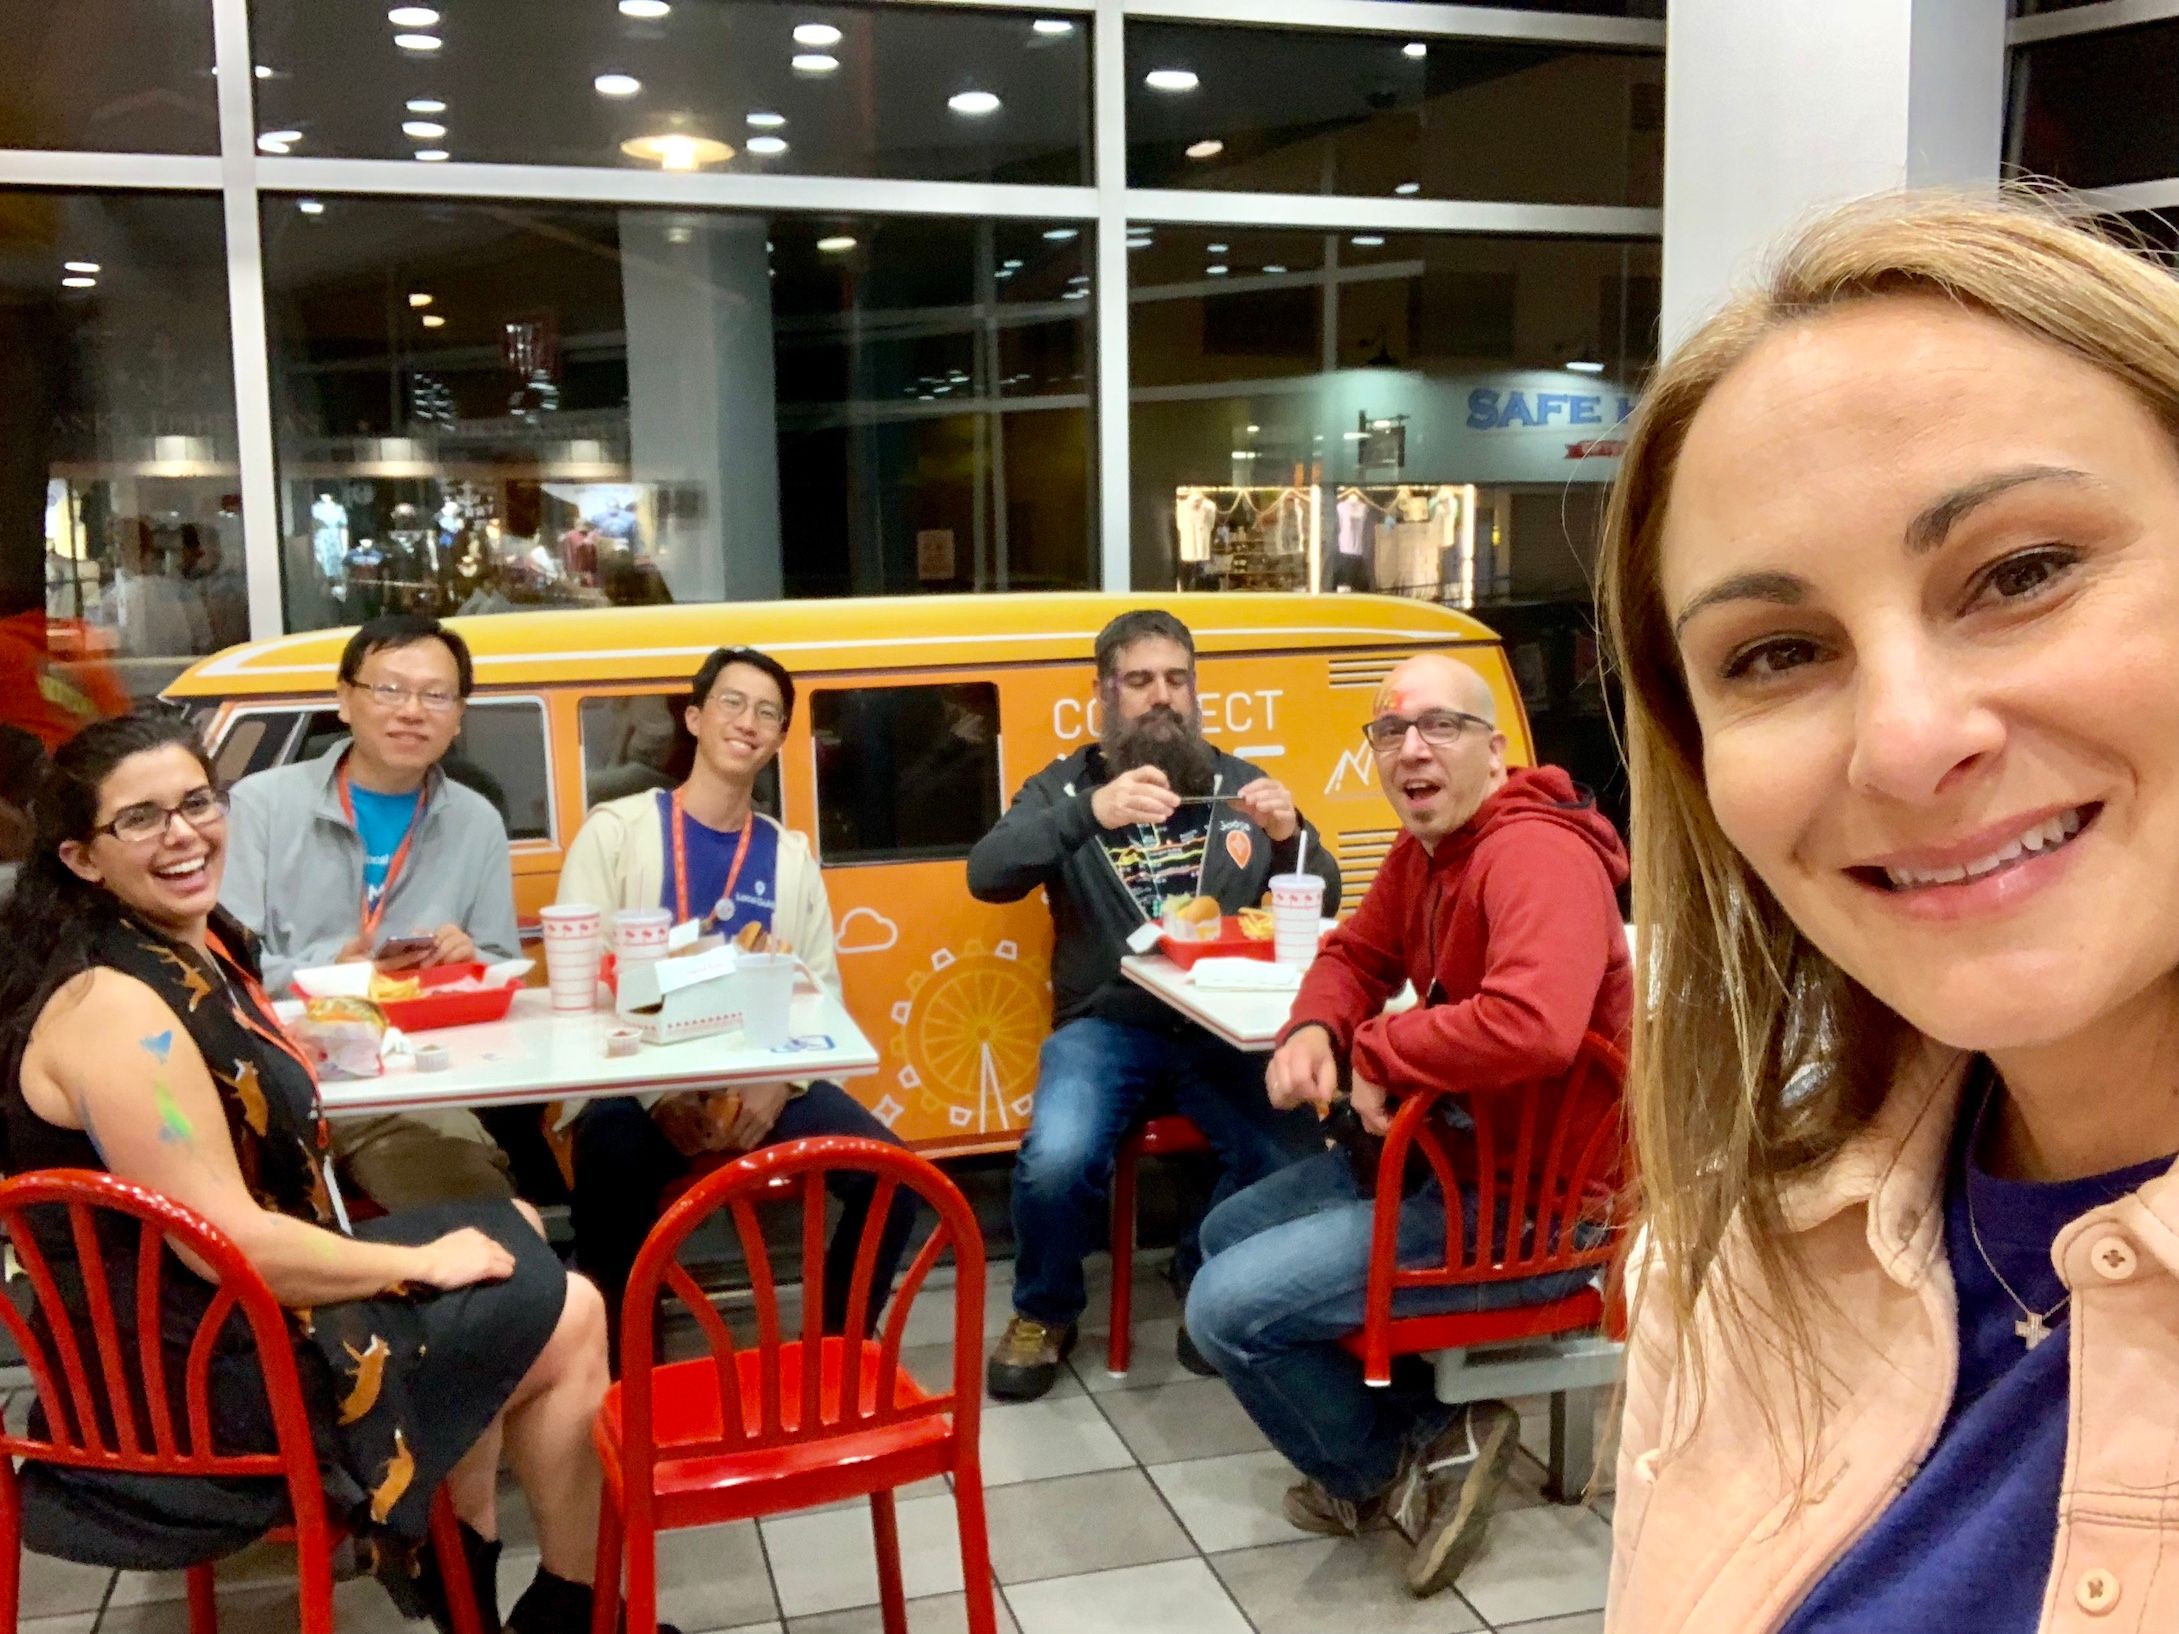 Midnight In-N-Out burgers and fries after all of Connect Live 2018 activities were over